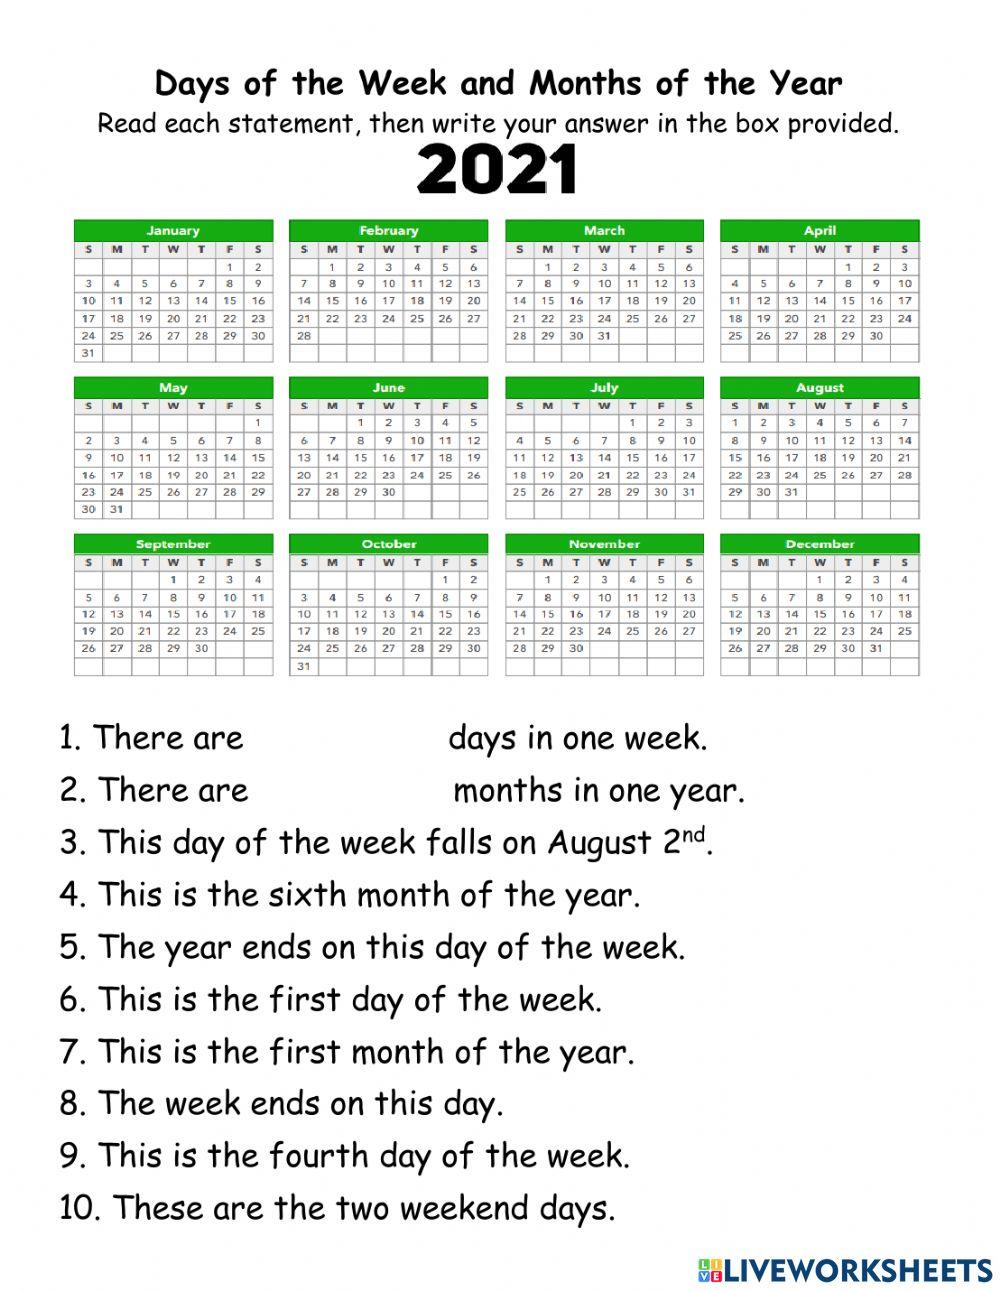 Days of the Week and Months of the Year